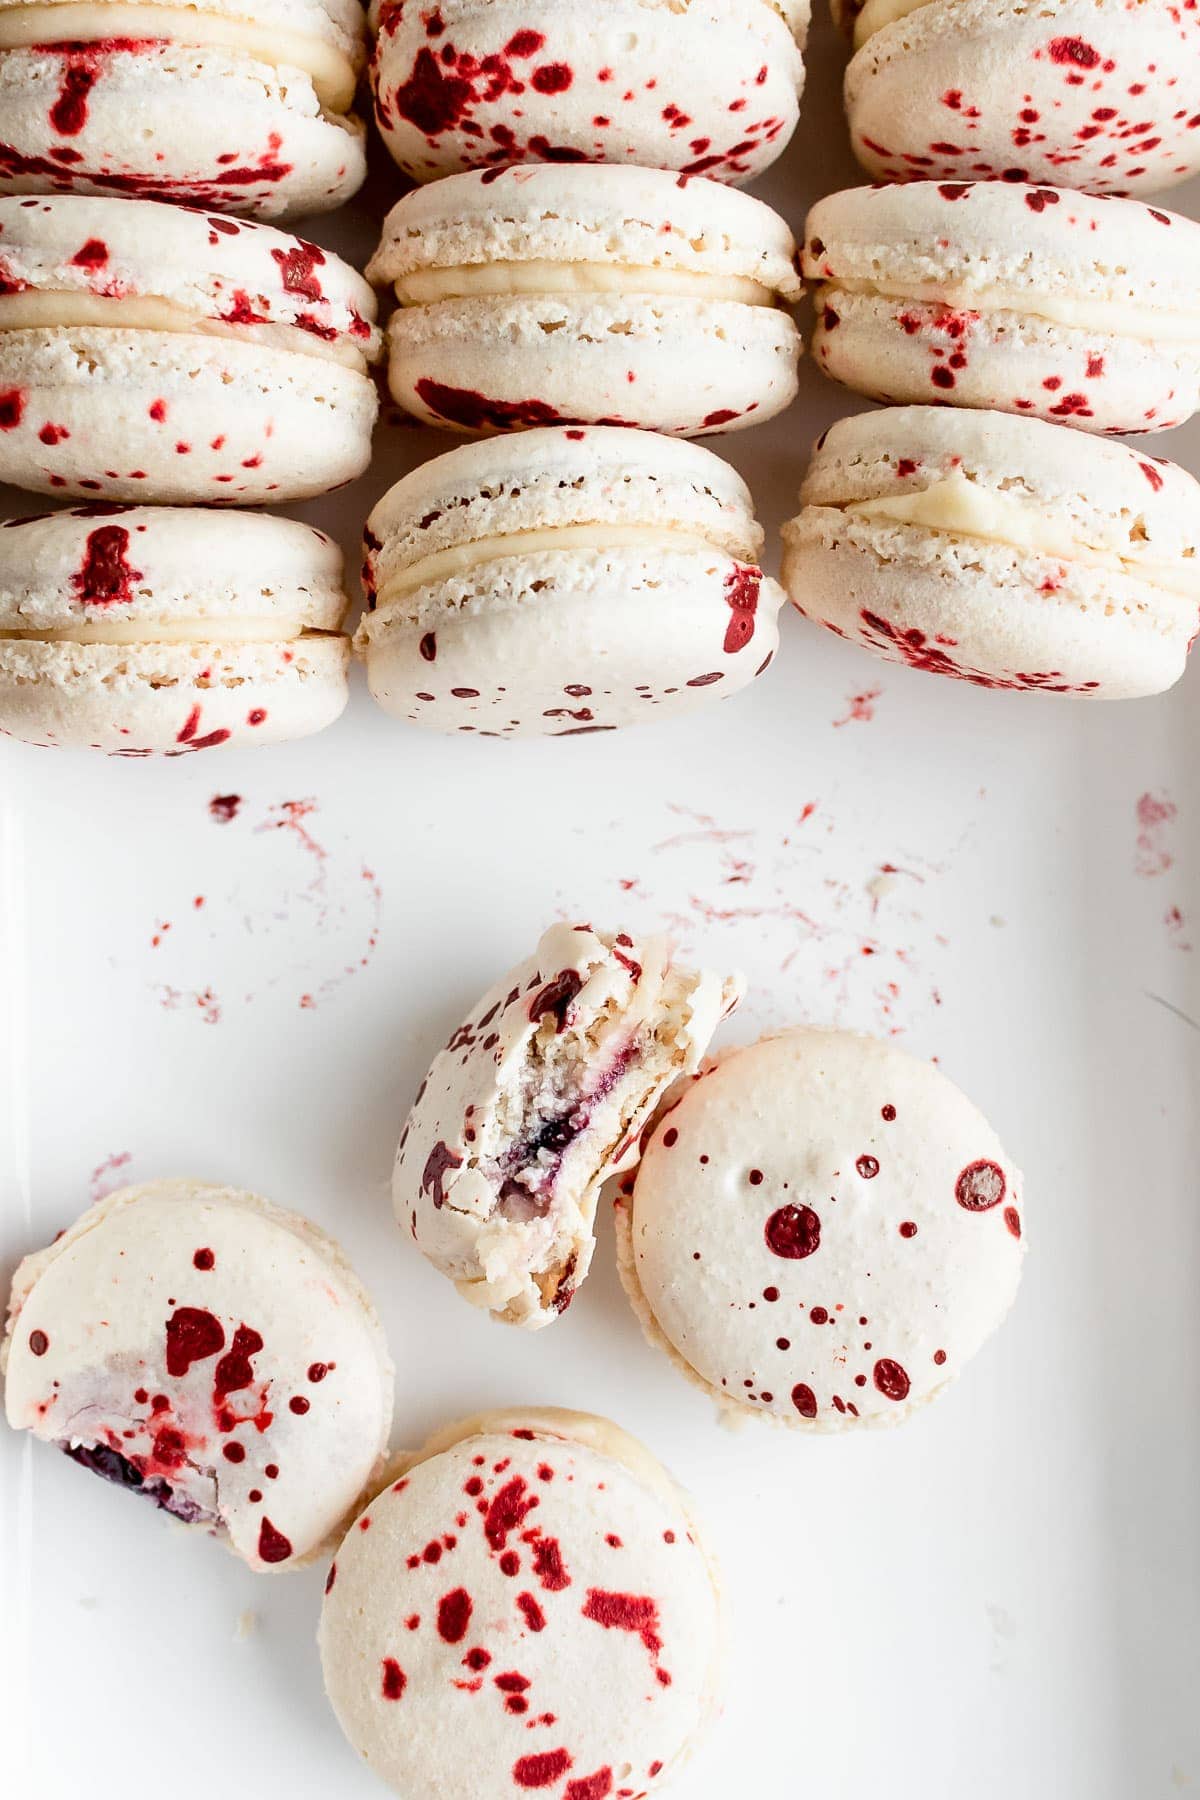 macarons with bites missing